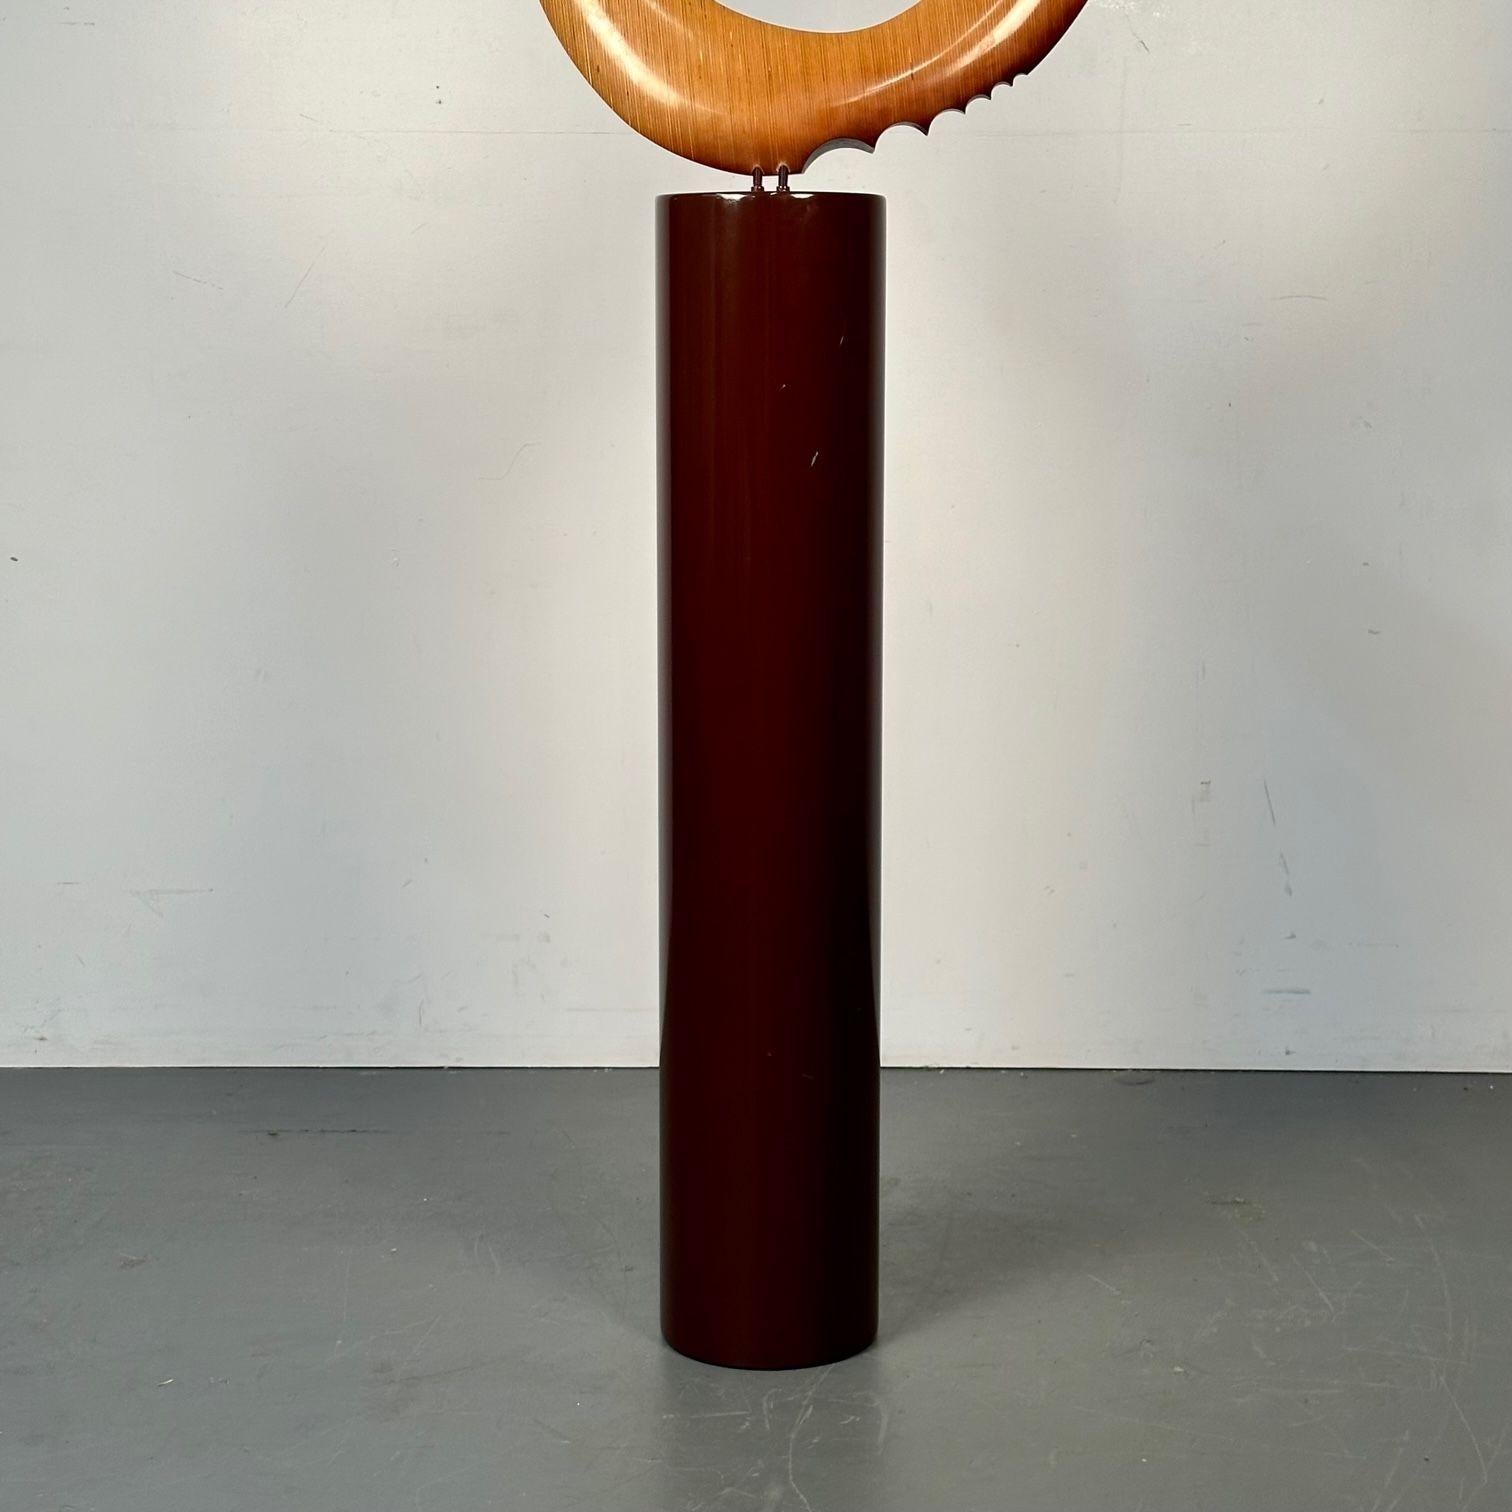  David Hymes, Contemporary, Boomerang Sculpture, Plywood, Steel Pedestal, 2010s For Sale 11